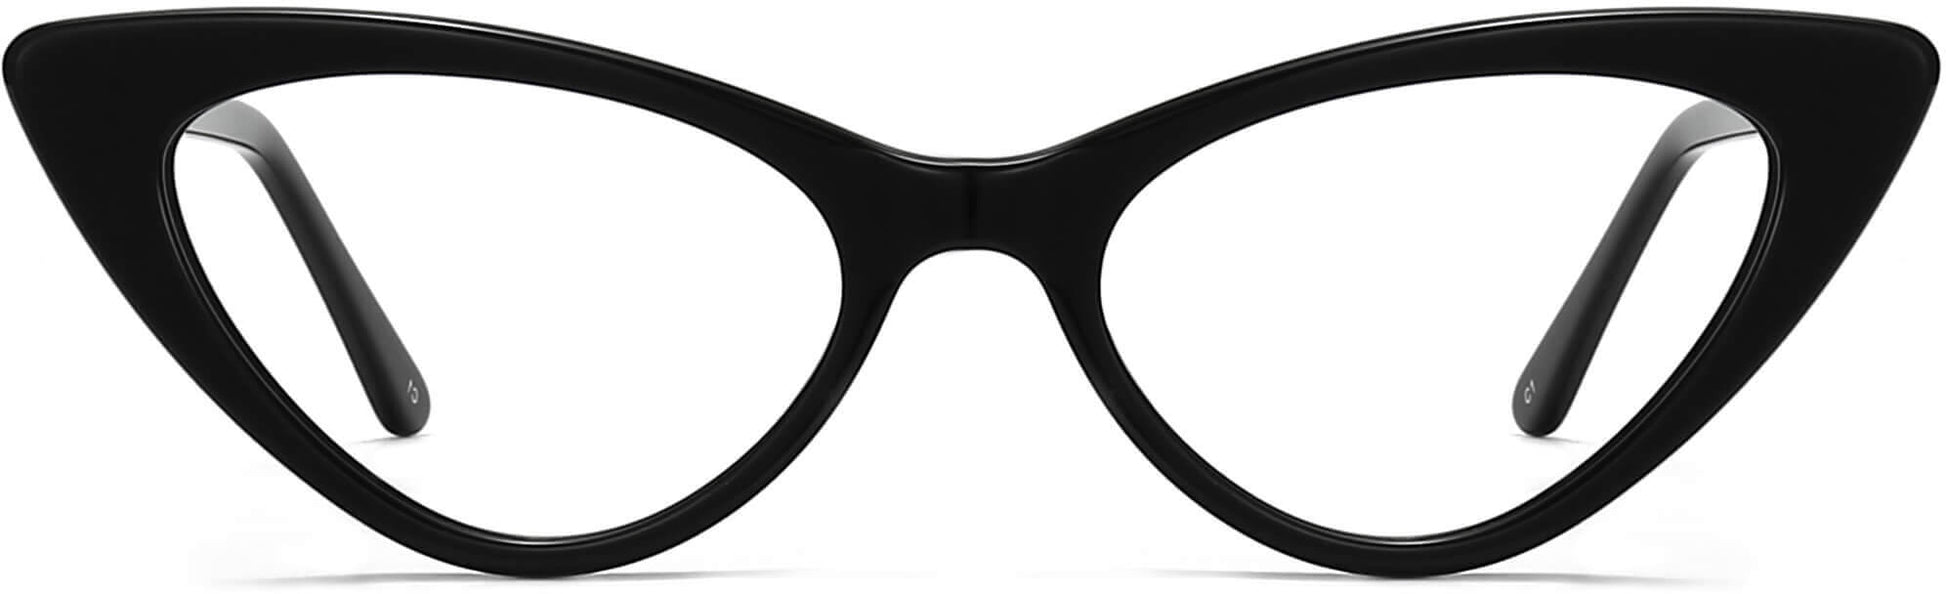 Brielle Cateye Black Eyeglasses from ANRRI, front view